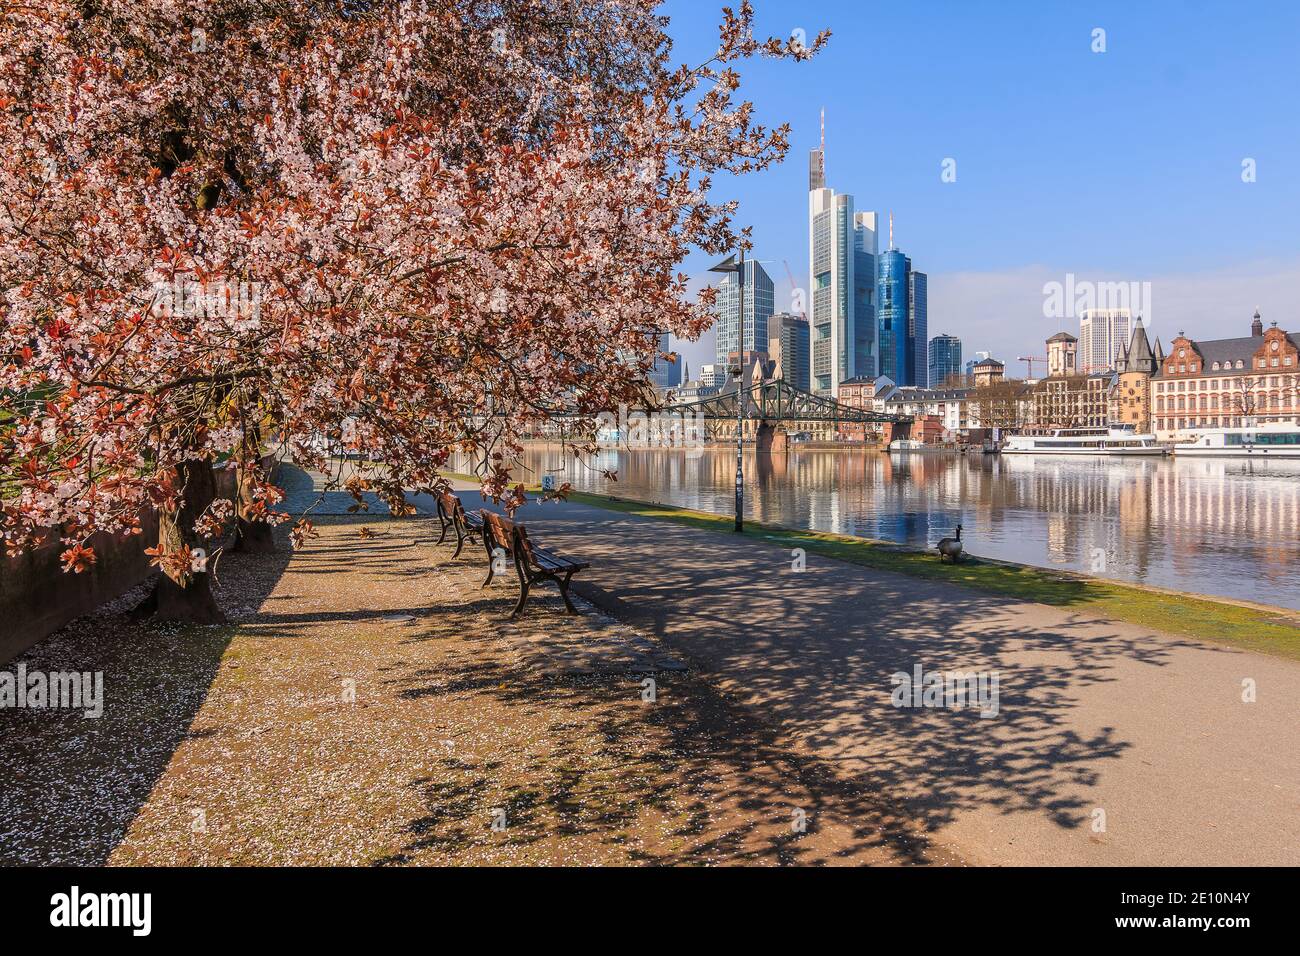 River promenade on the Main in Frankfurt in spring. Skyline with skyscrapers from the financial district with blue sky and sunshine. Tree and bench wi Stock Photo